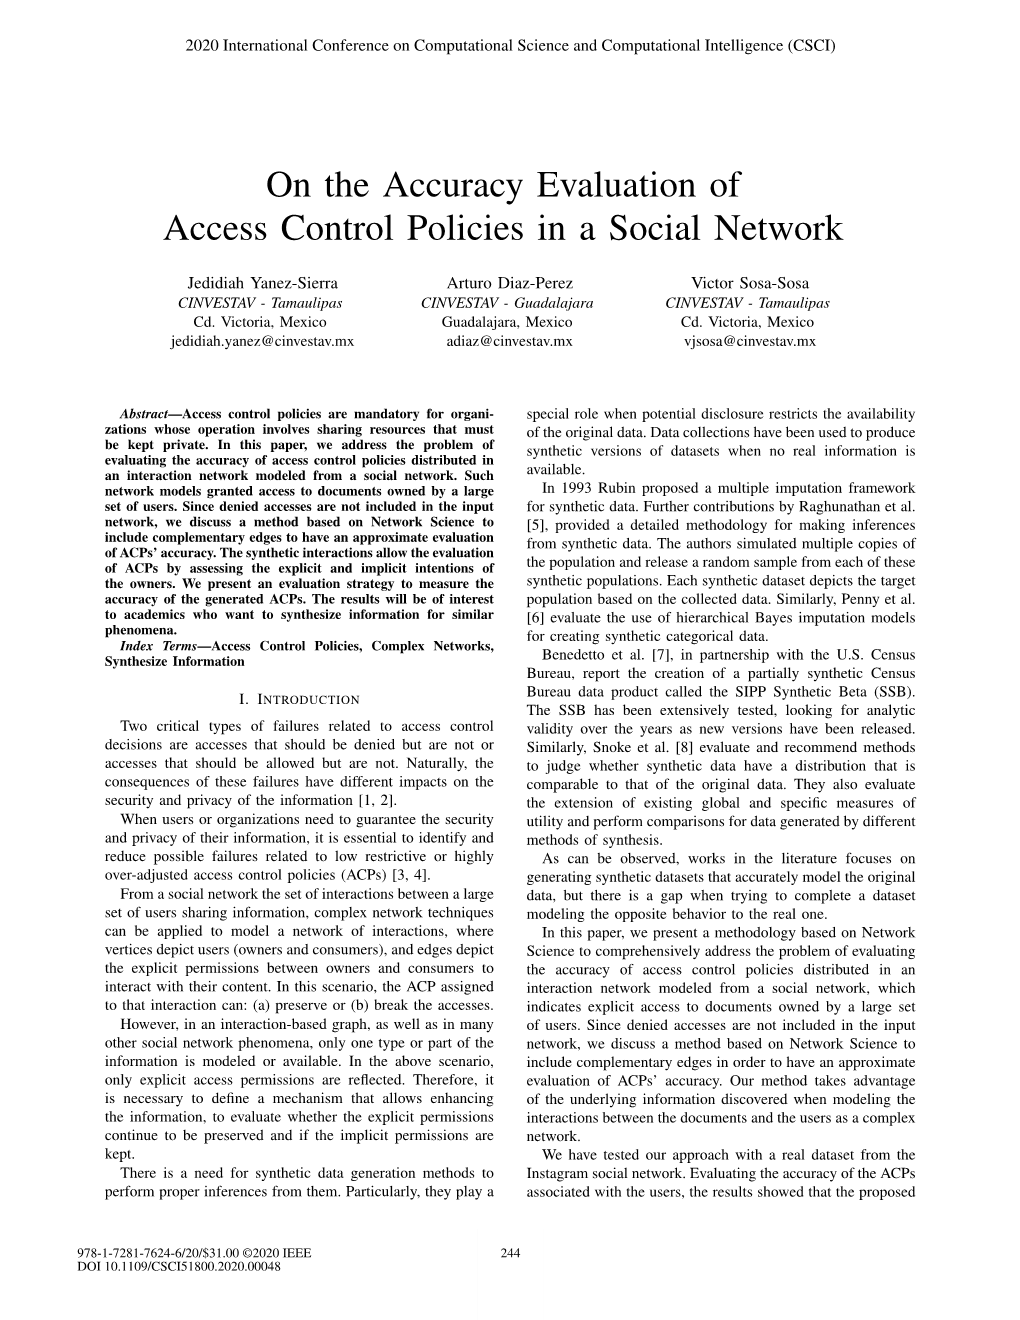 On the Accuracy Evaluation of Access Control Policies in a Social Network